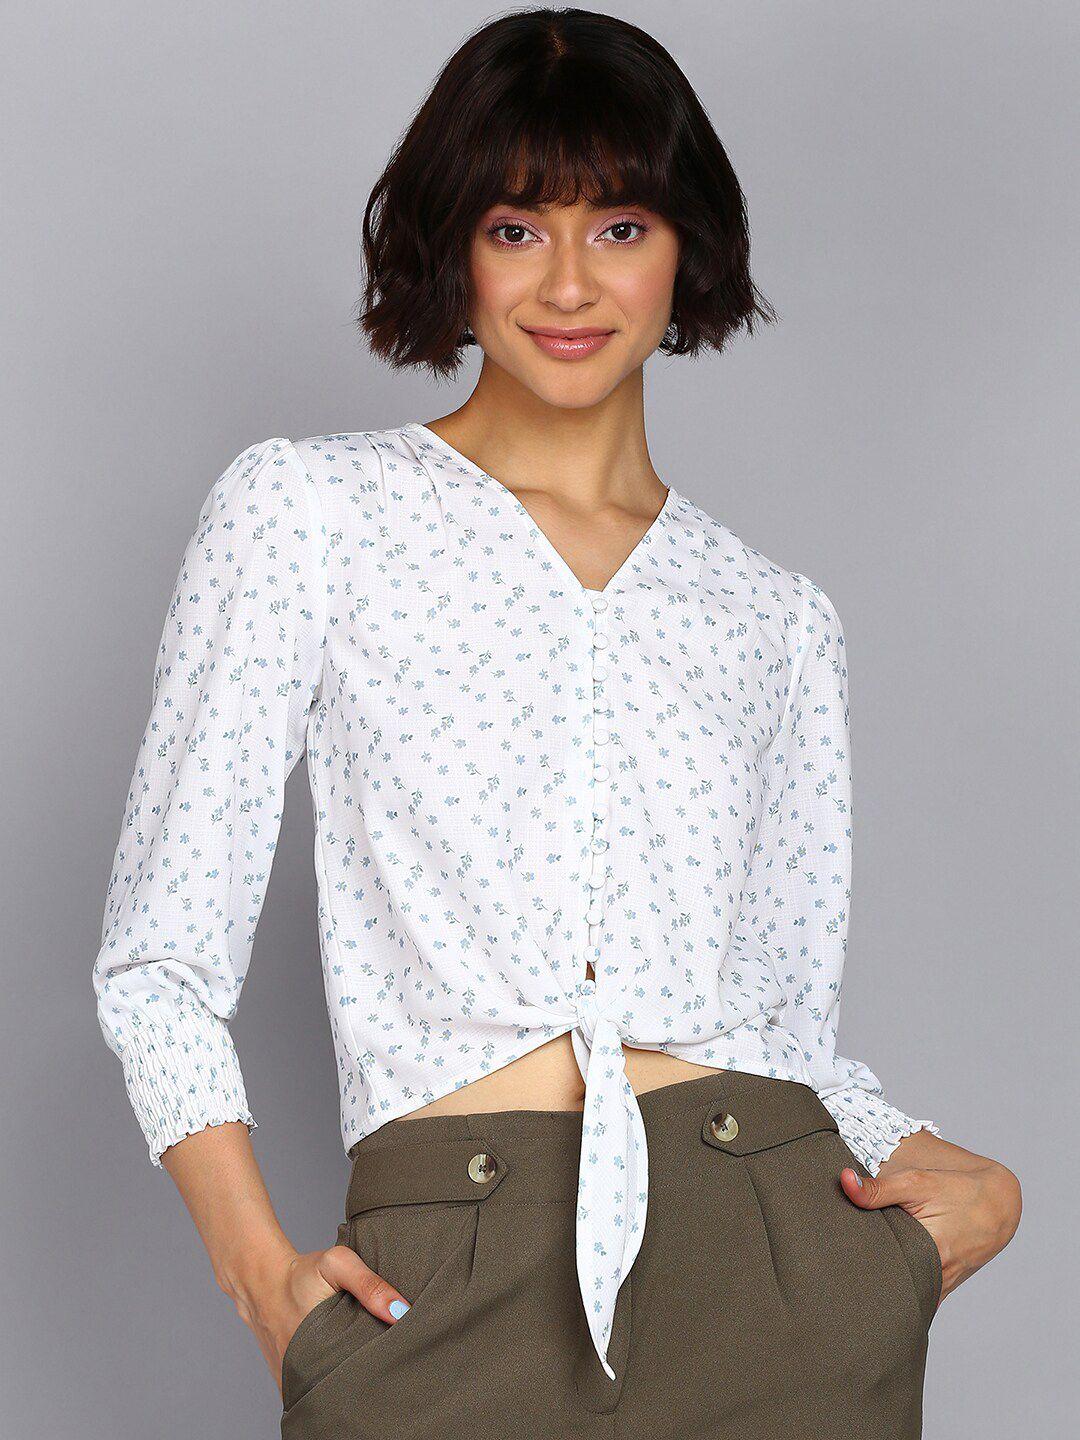 mast & harbour white floral print crepe shirt style crop top